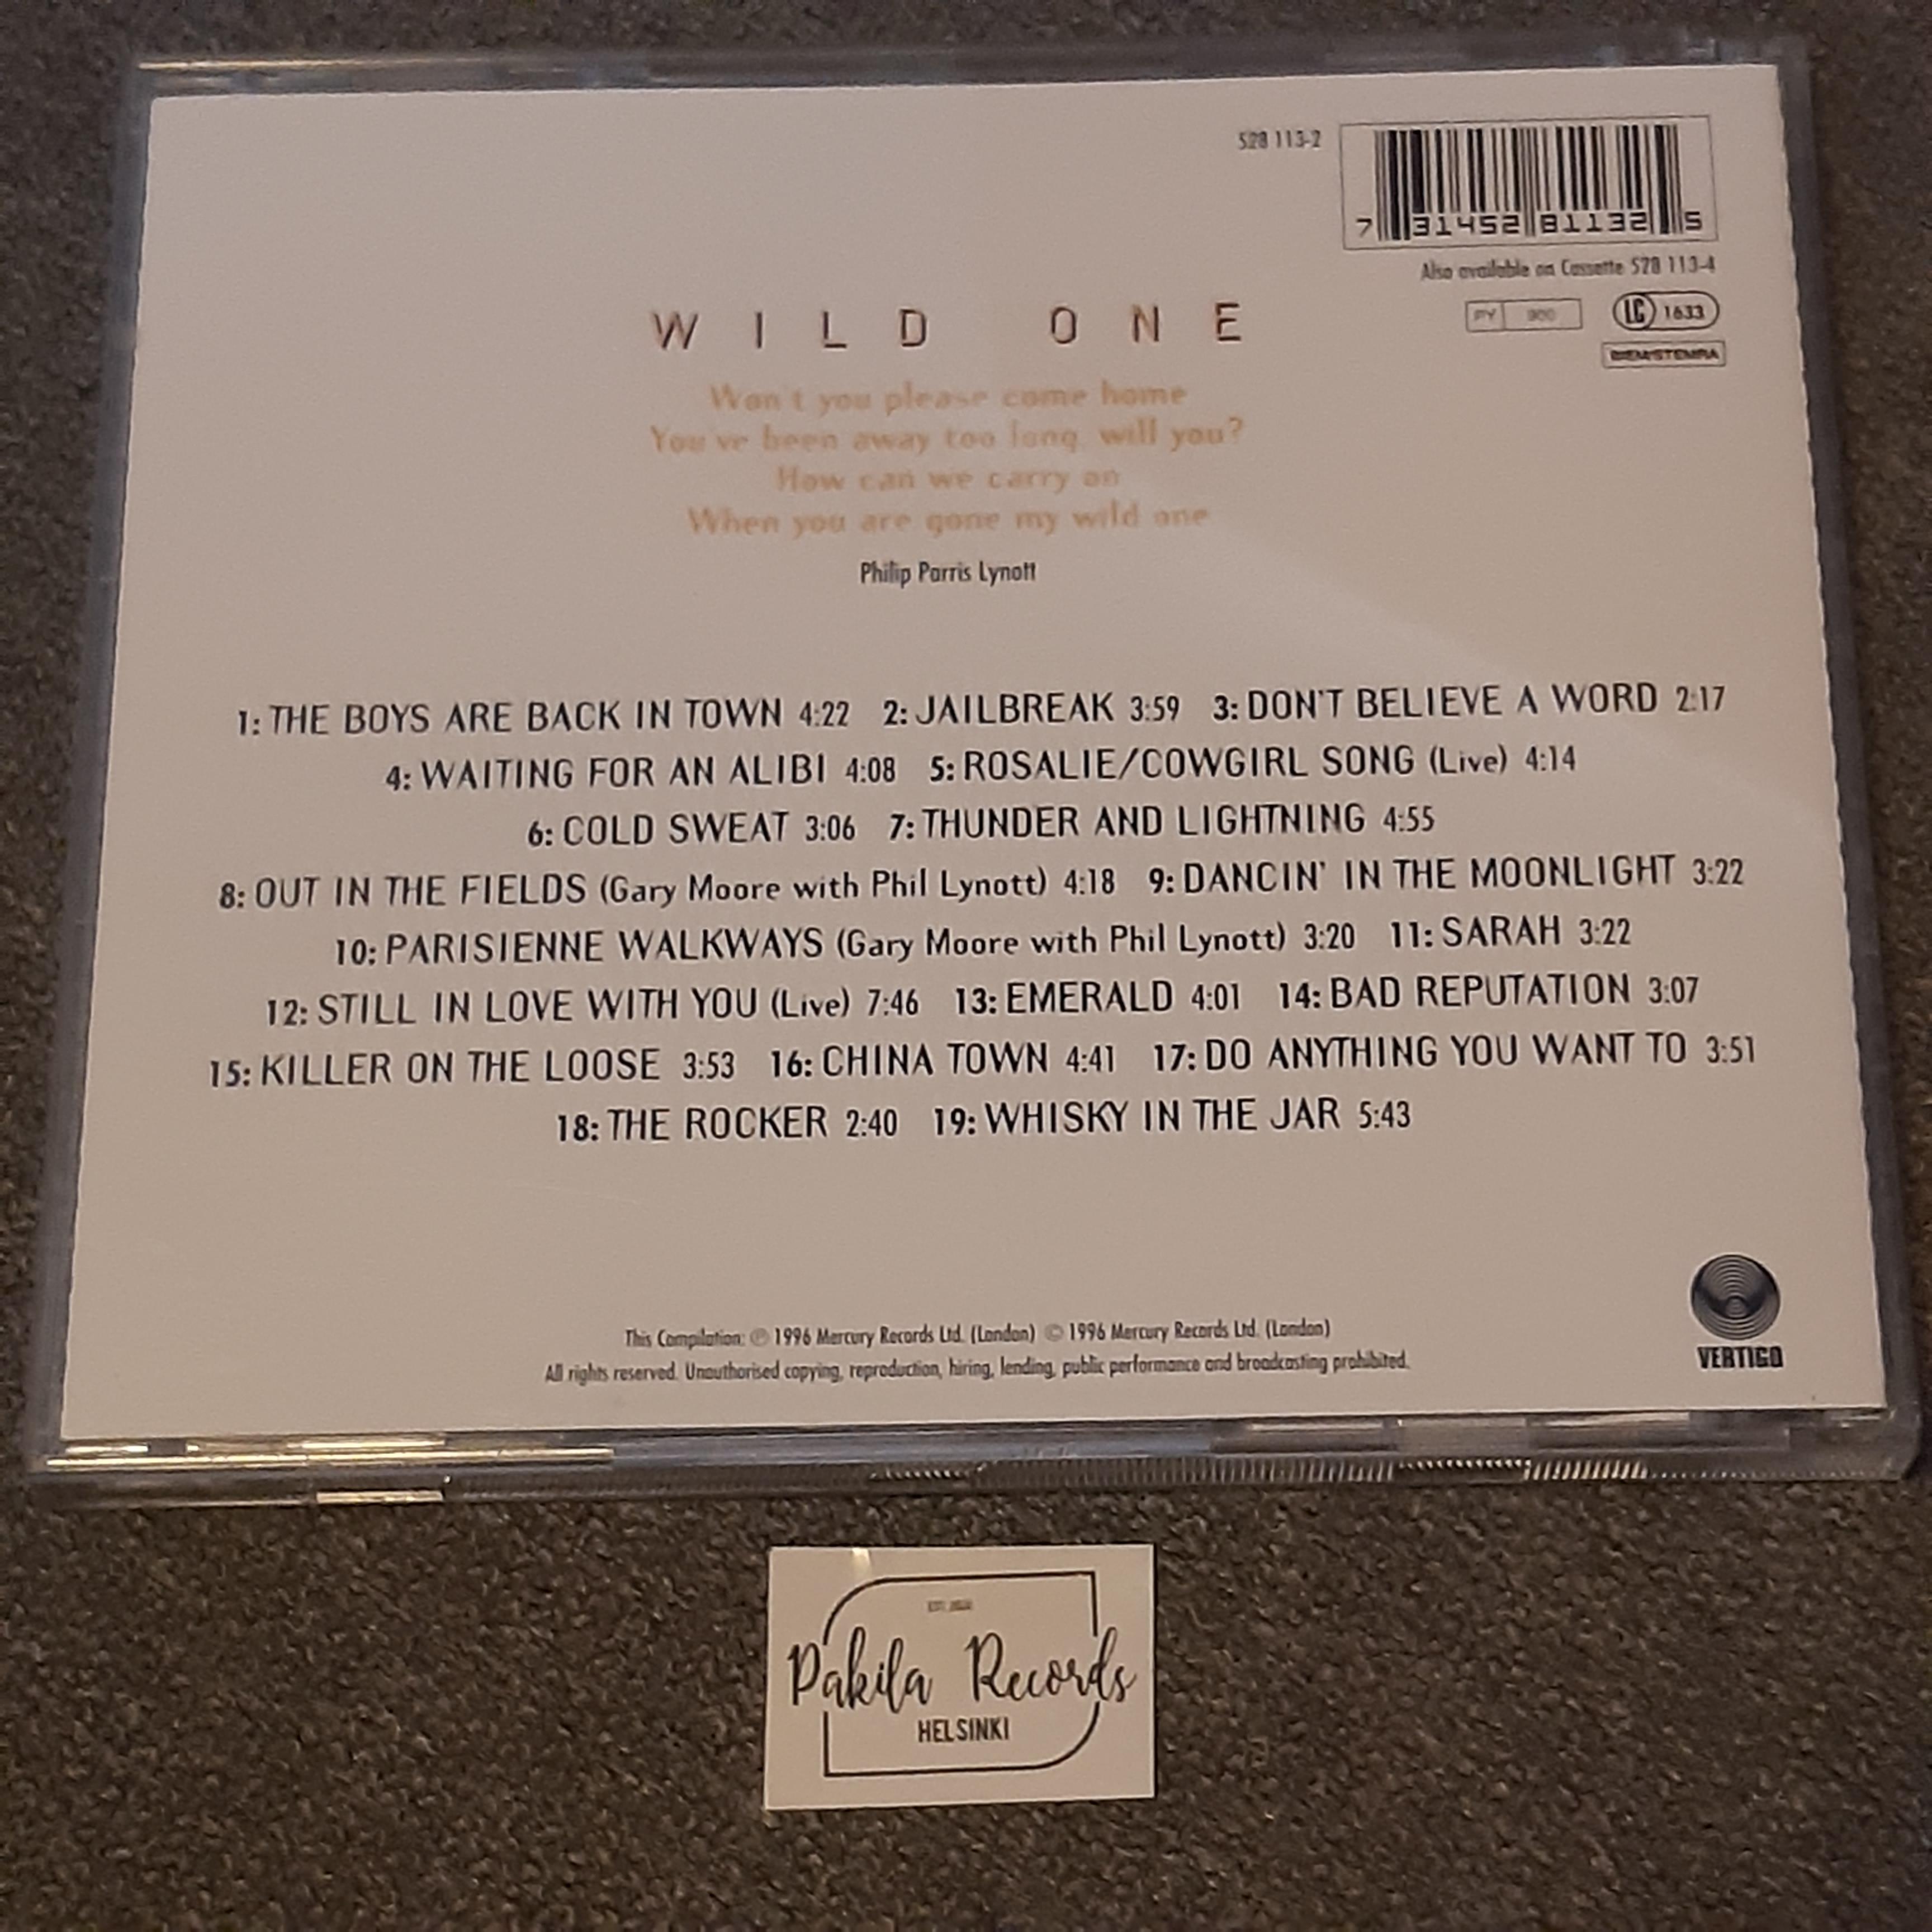 Thin Lizzy - Wild One, The Very Best Of - CD (käytetty)